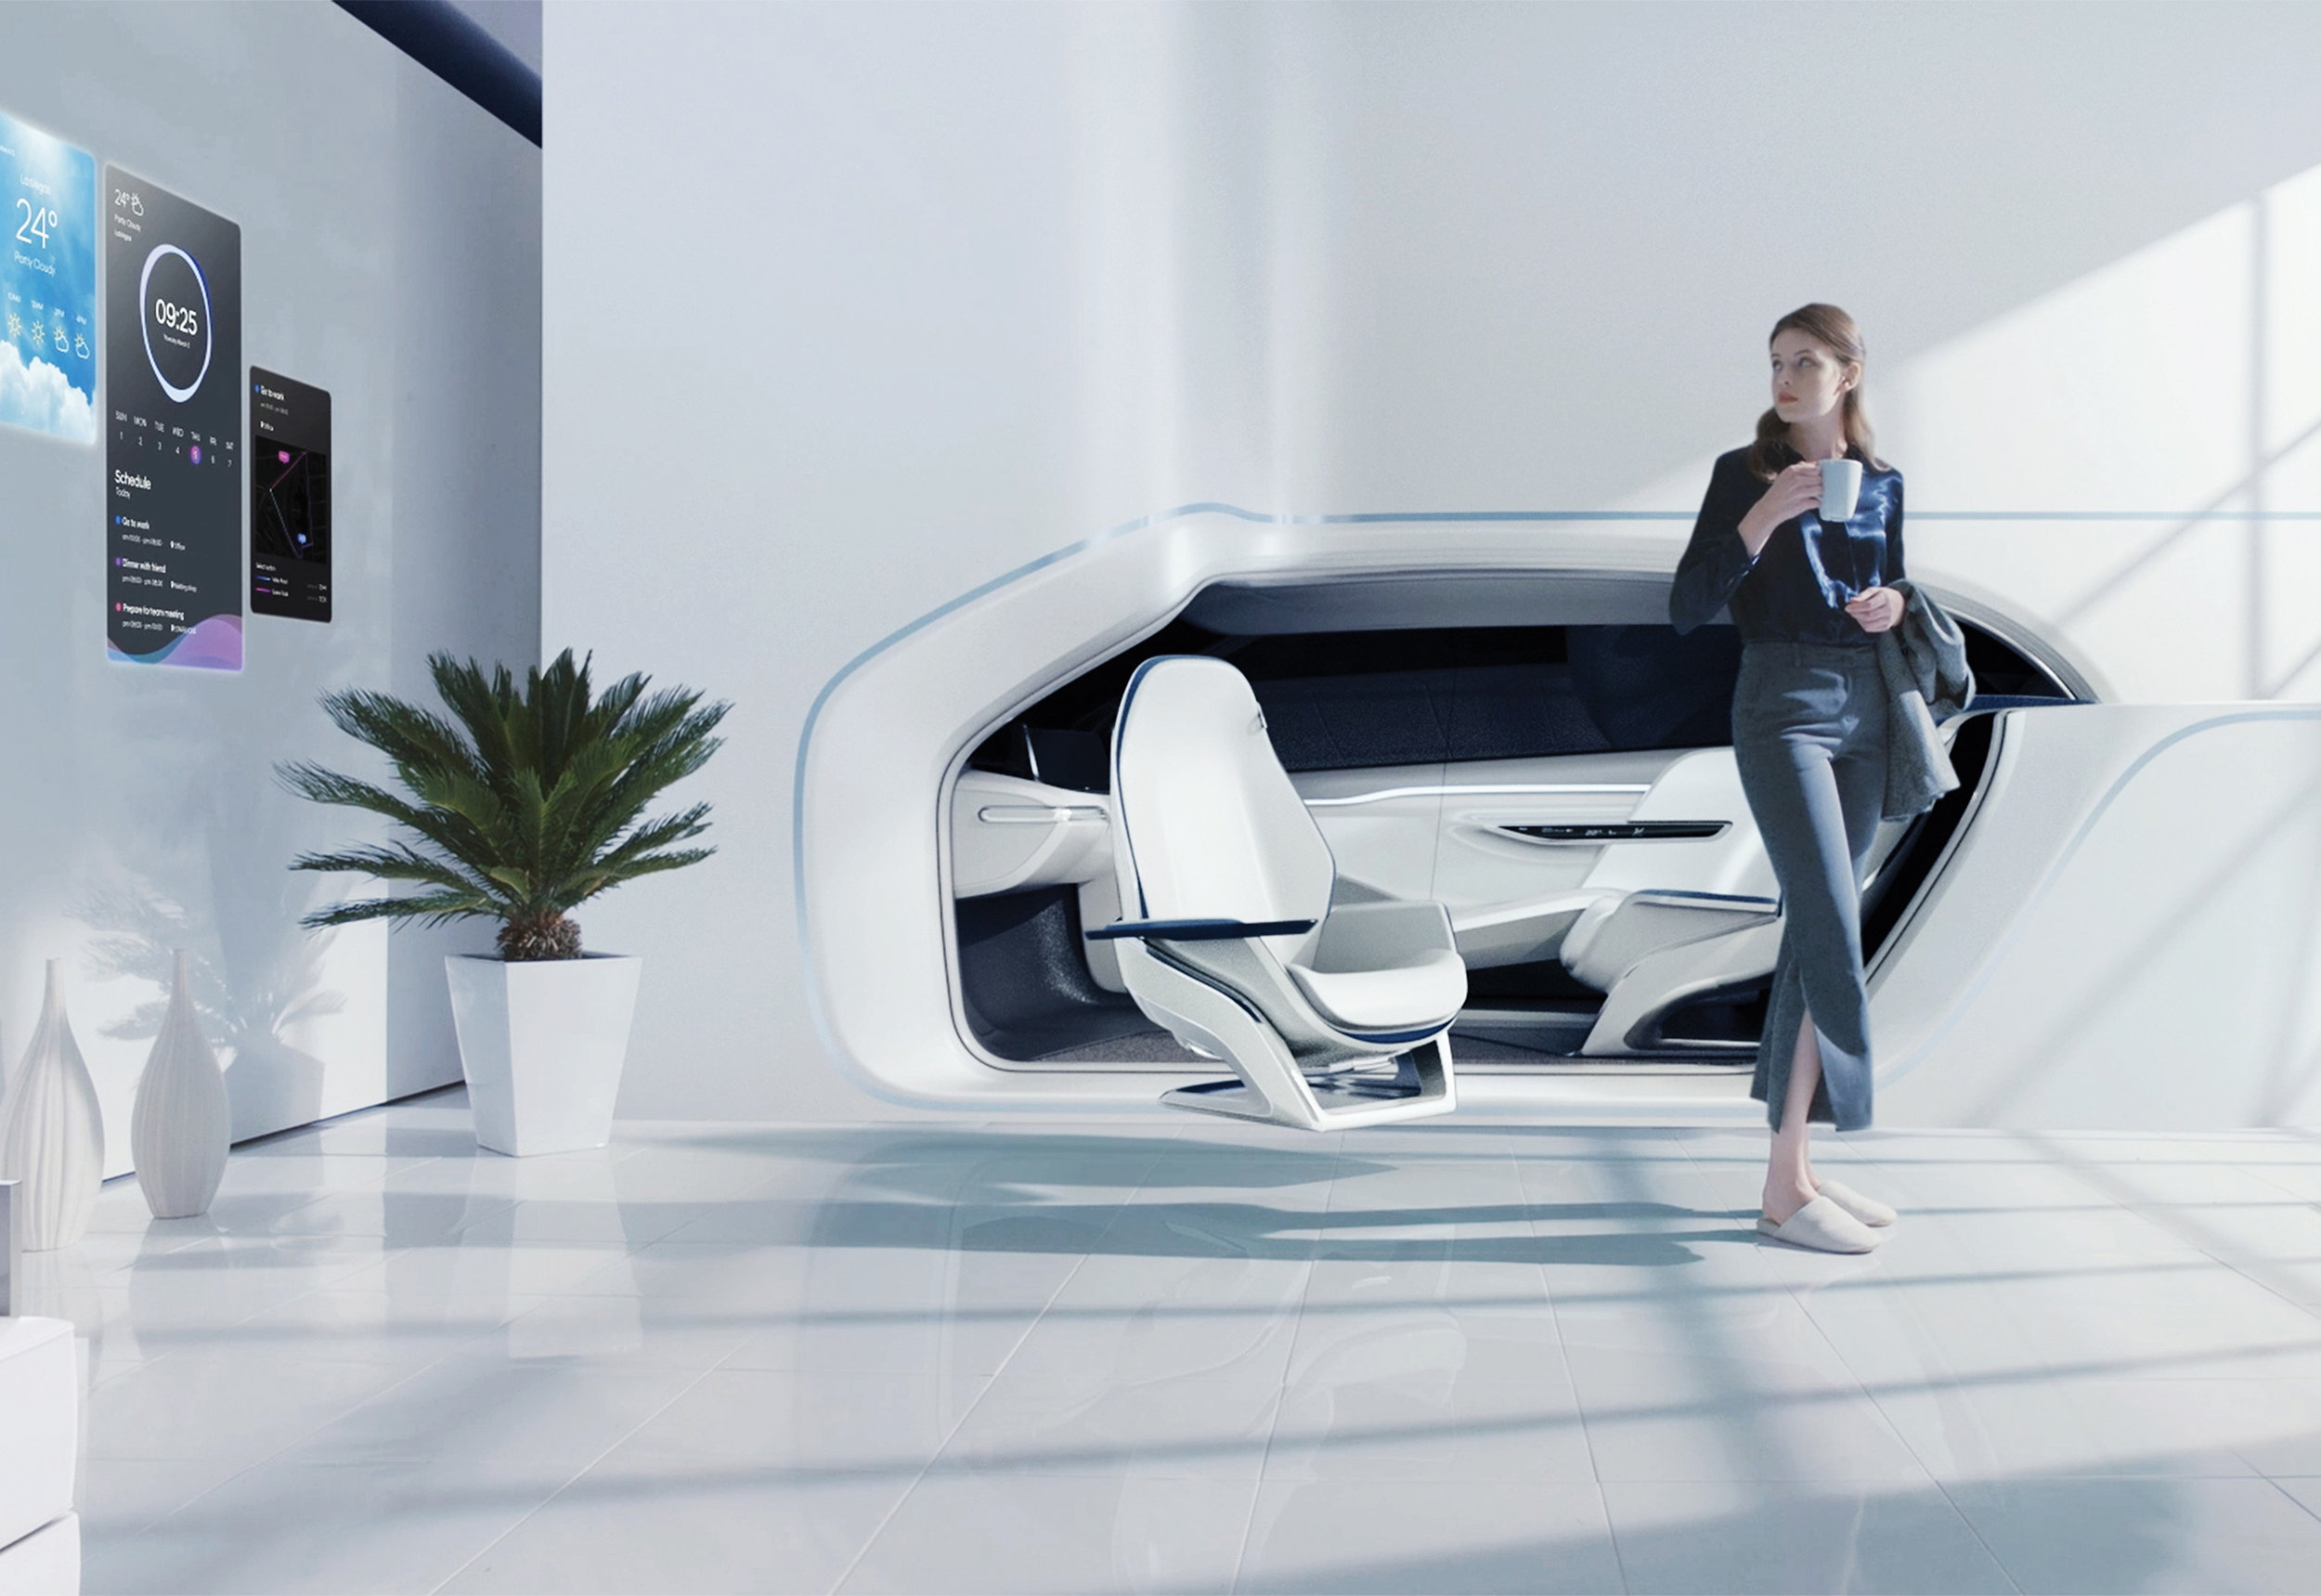 Hyundai-Motor-to-Showcase-Vision-for-Future-Mobility_Mobility-Vision-Smart-House_5.jpg